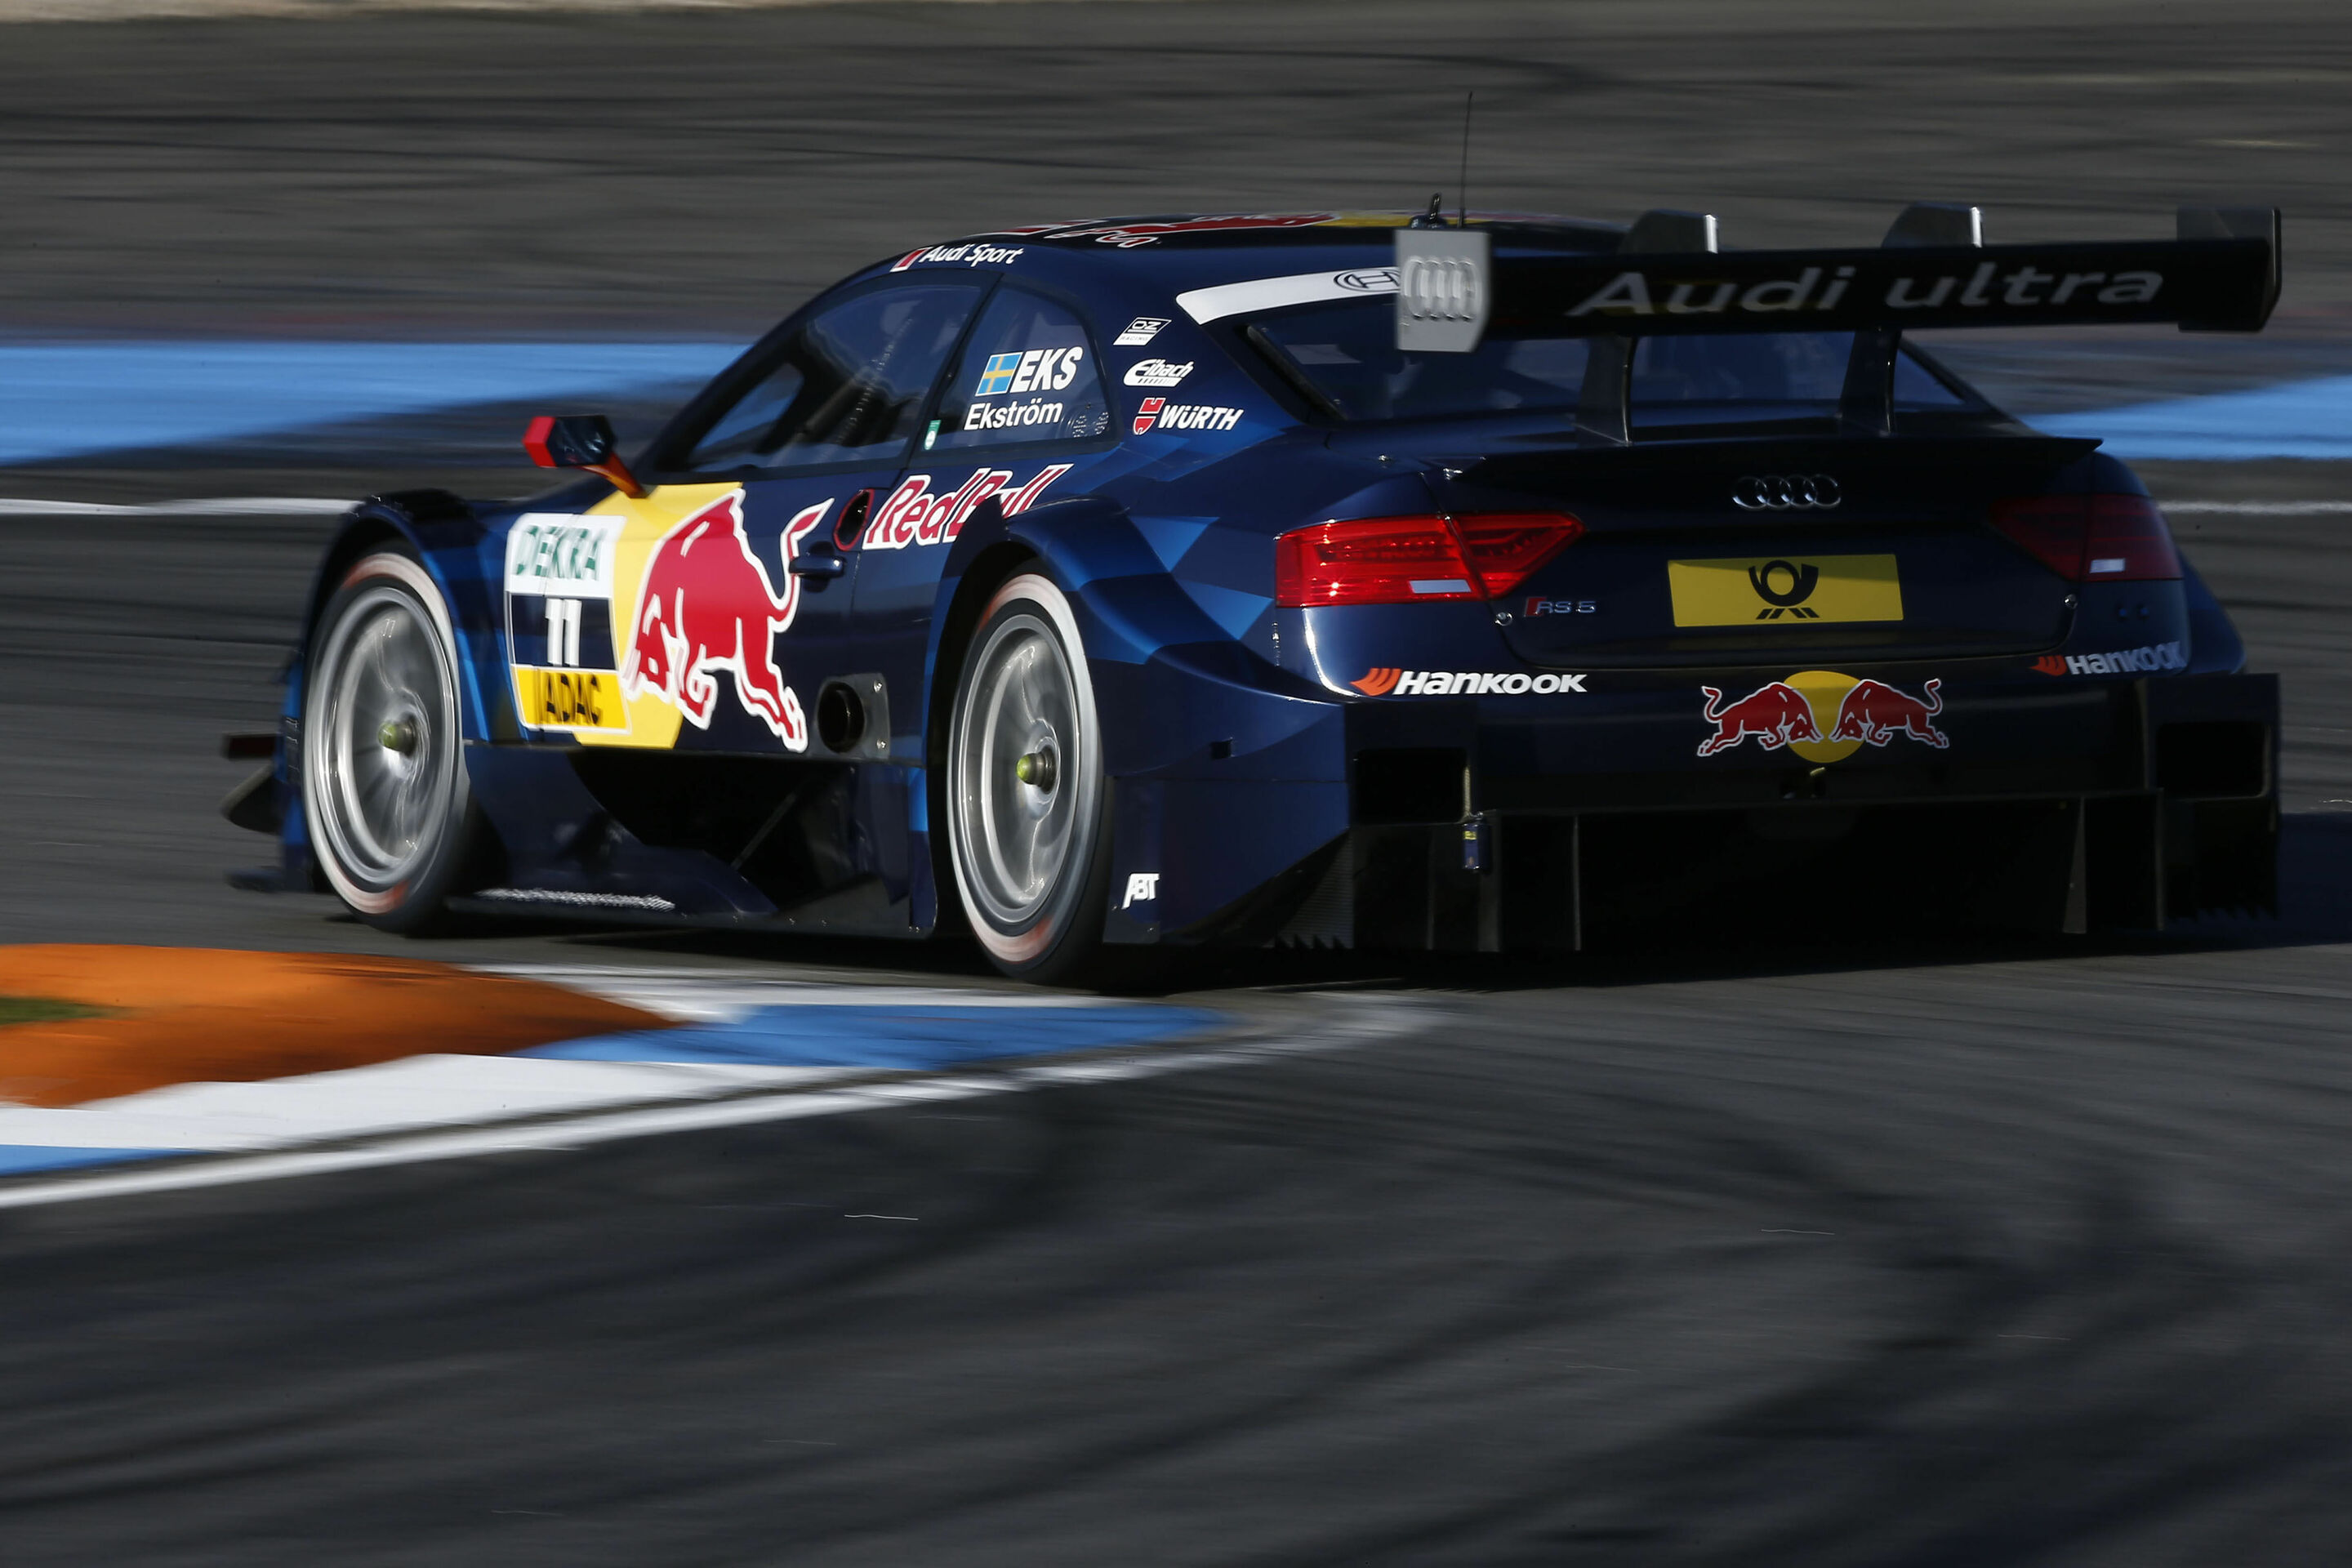 Quotes after qualifying at Hockenheim